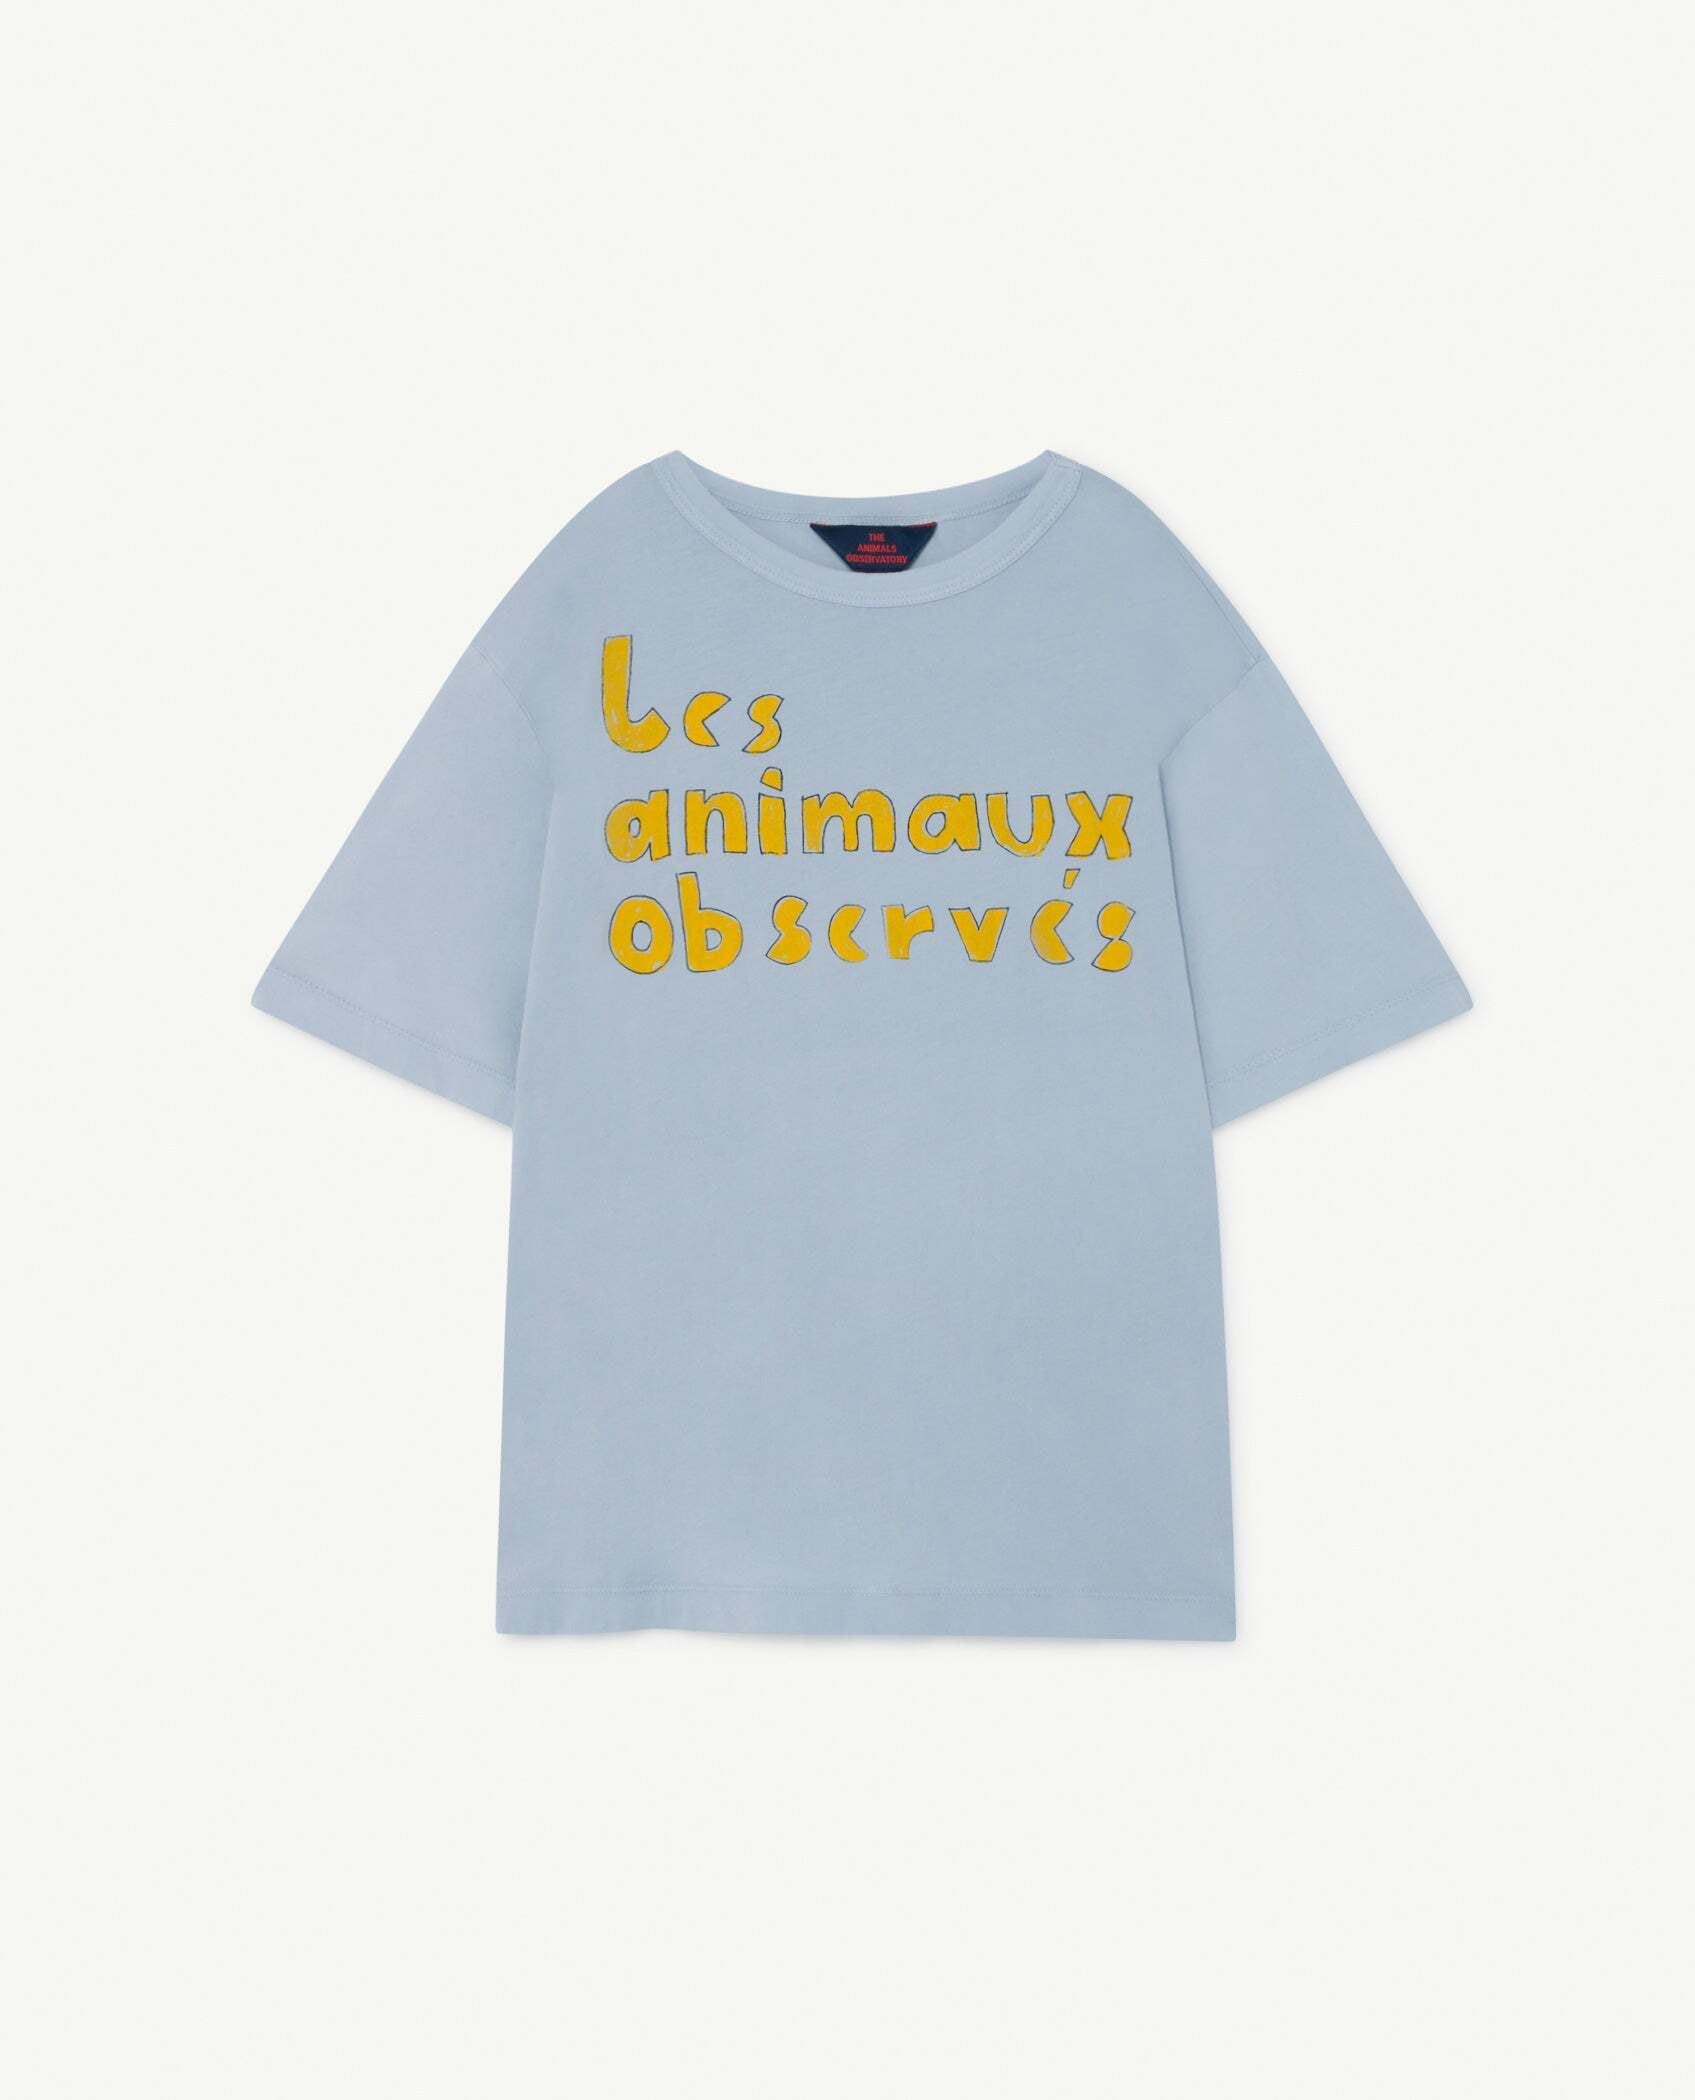 The animals observatory Tシャツ ❁﻿